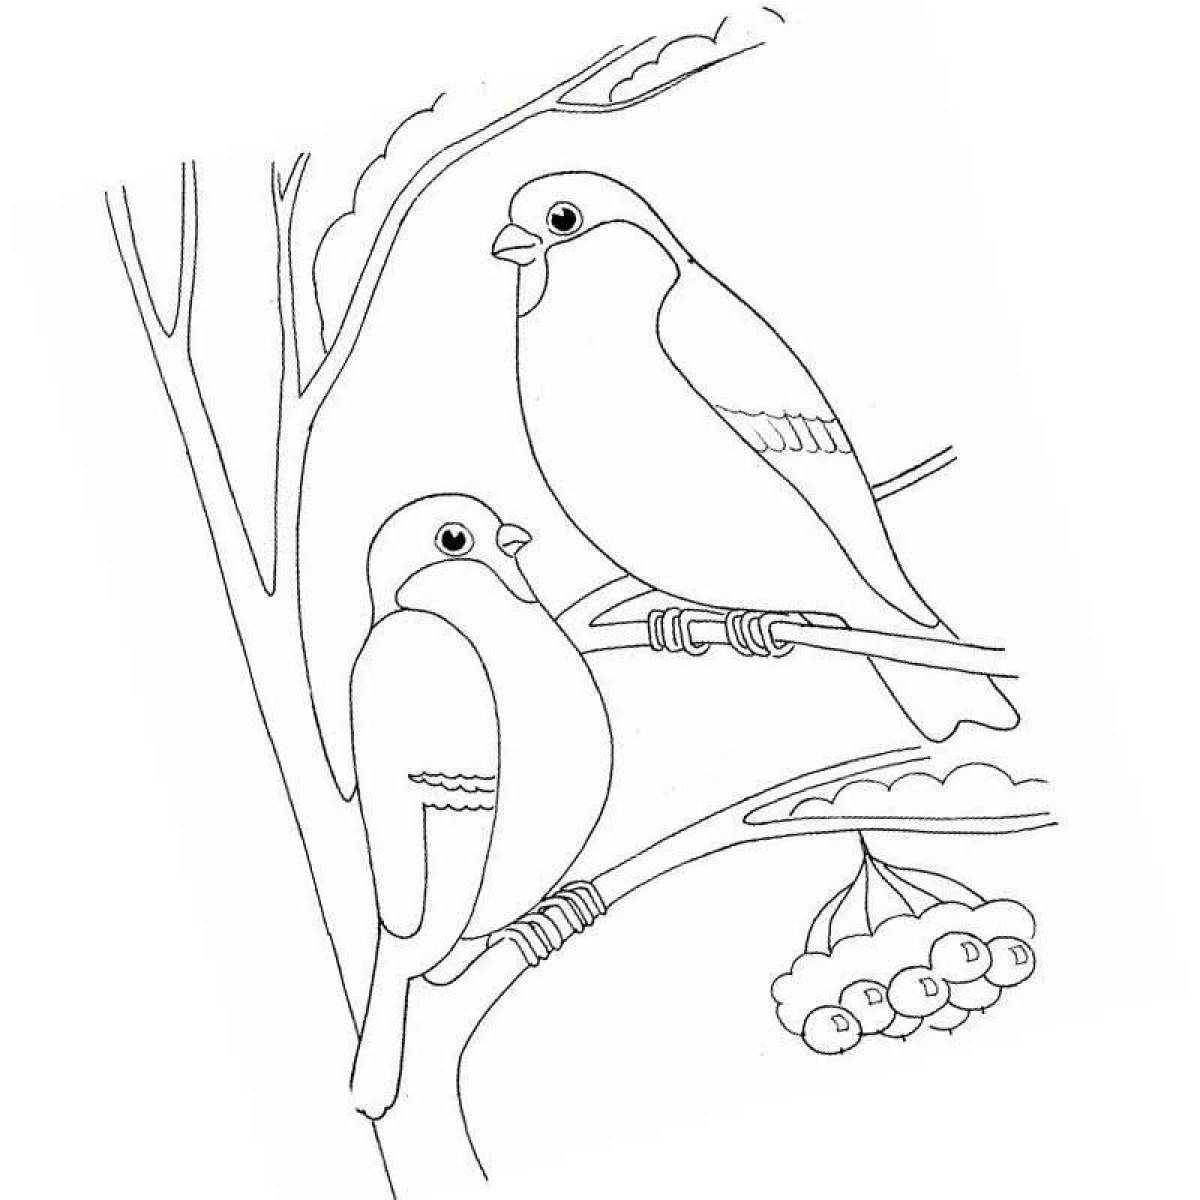 Coloring book dazzling wintering birds for children 4-5 years old